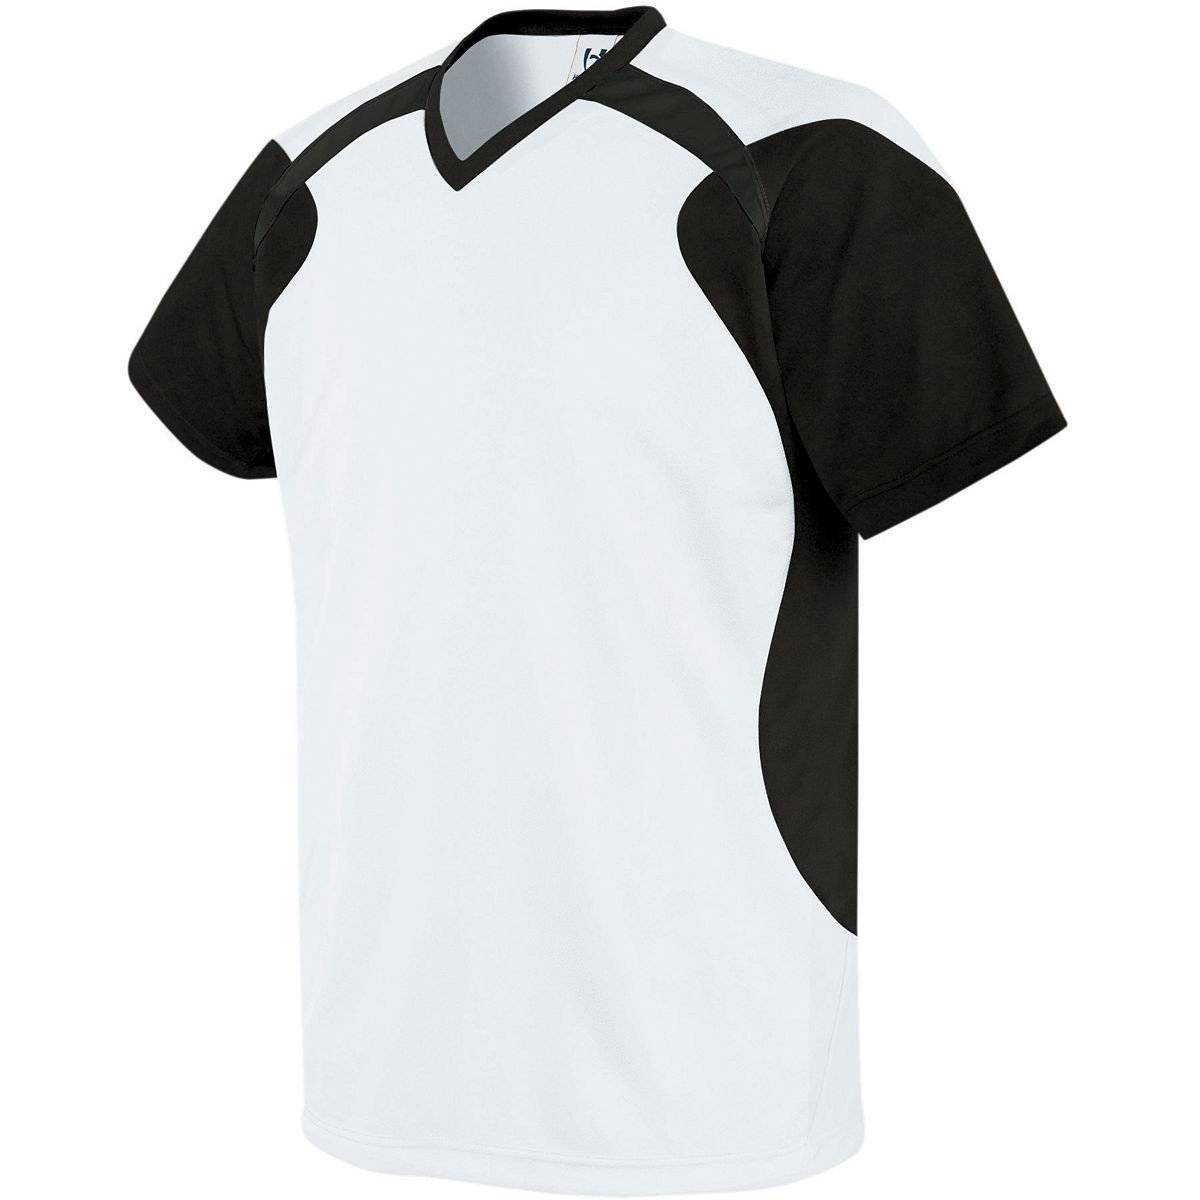 High Five 322711 Tempest Jersey Youth - White Black Black - HIT a Double